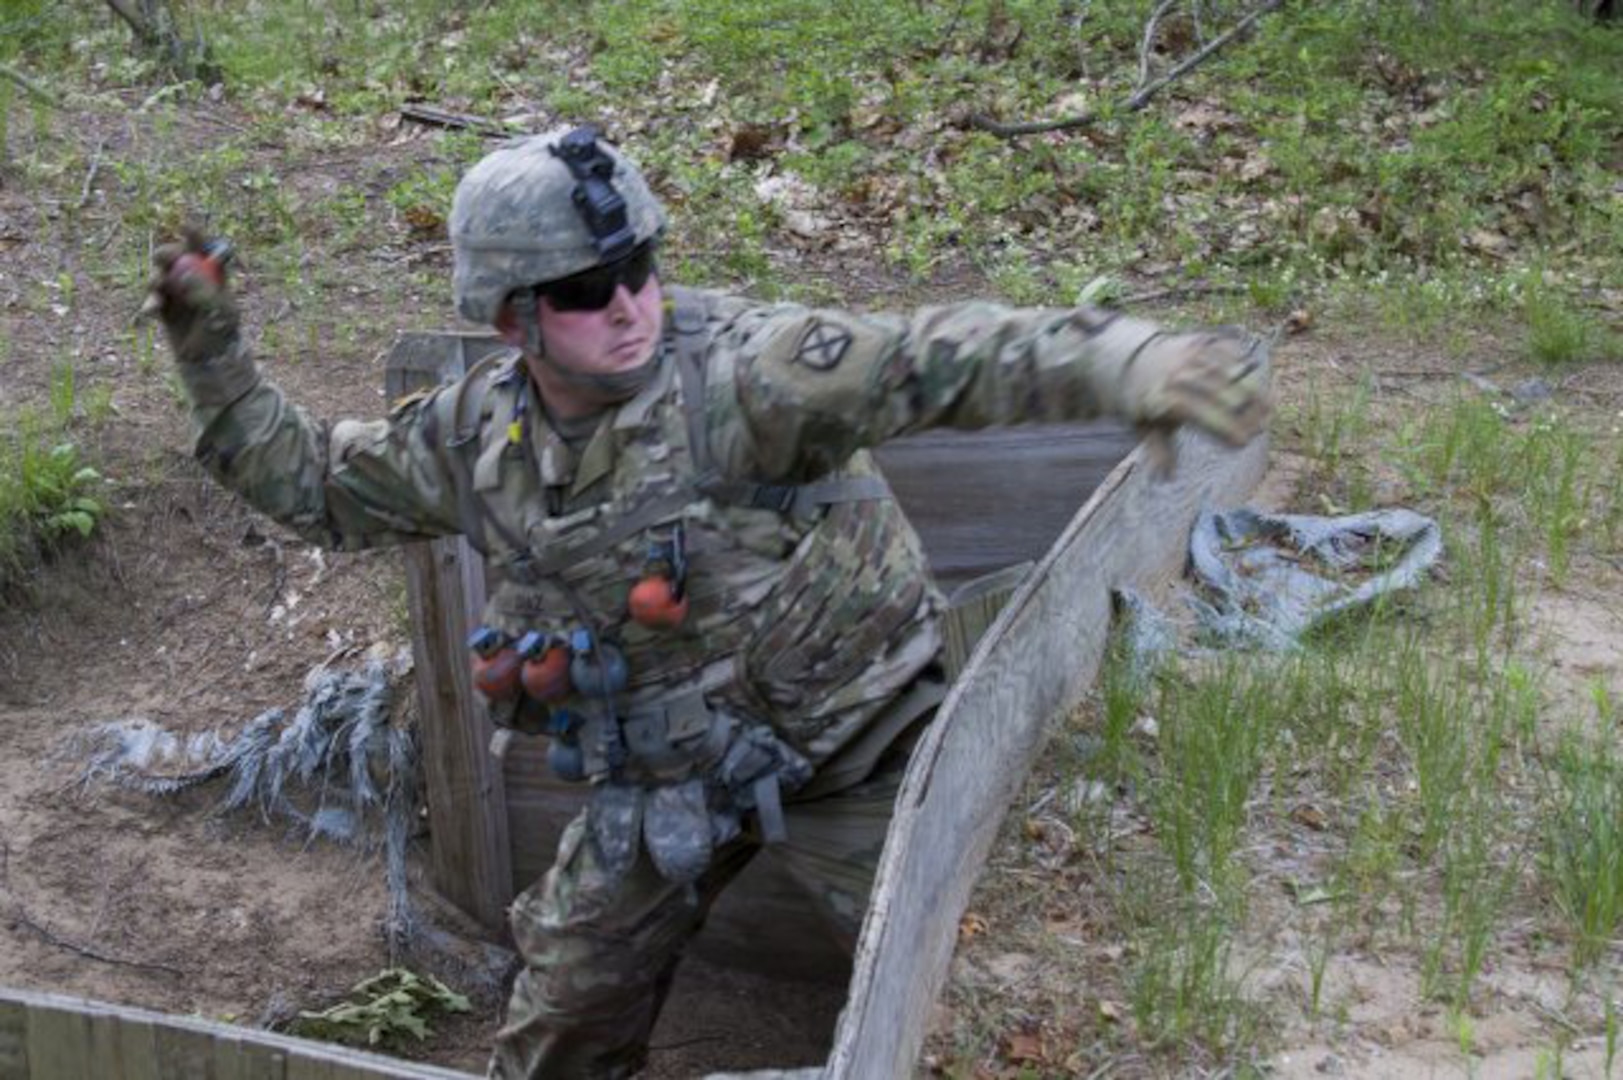 U.S. Army Spc. Andres Diaz, Detachment 1, Alpha Company, 572nd Brigade Engineer Battalion, 86th Infantry Brigade Combat Team (Mountain), Vermont National Guard, throws a training grenade at Fort Drum, N.Y., June 13, 2017.  The Vermont Guard is a finalist in the Army Communities of Excellence.